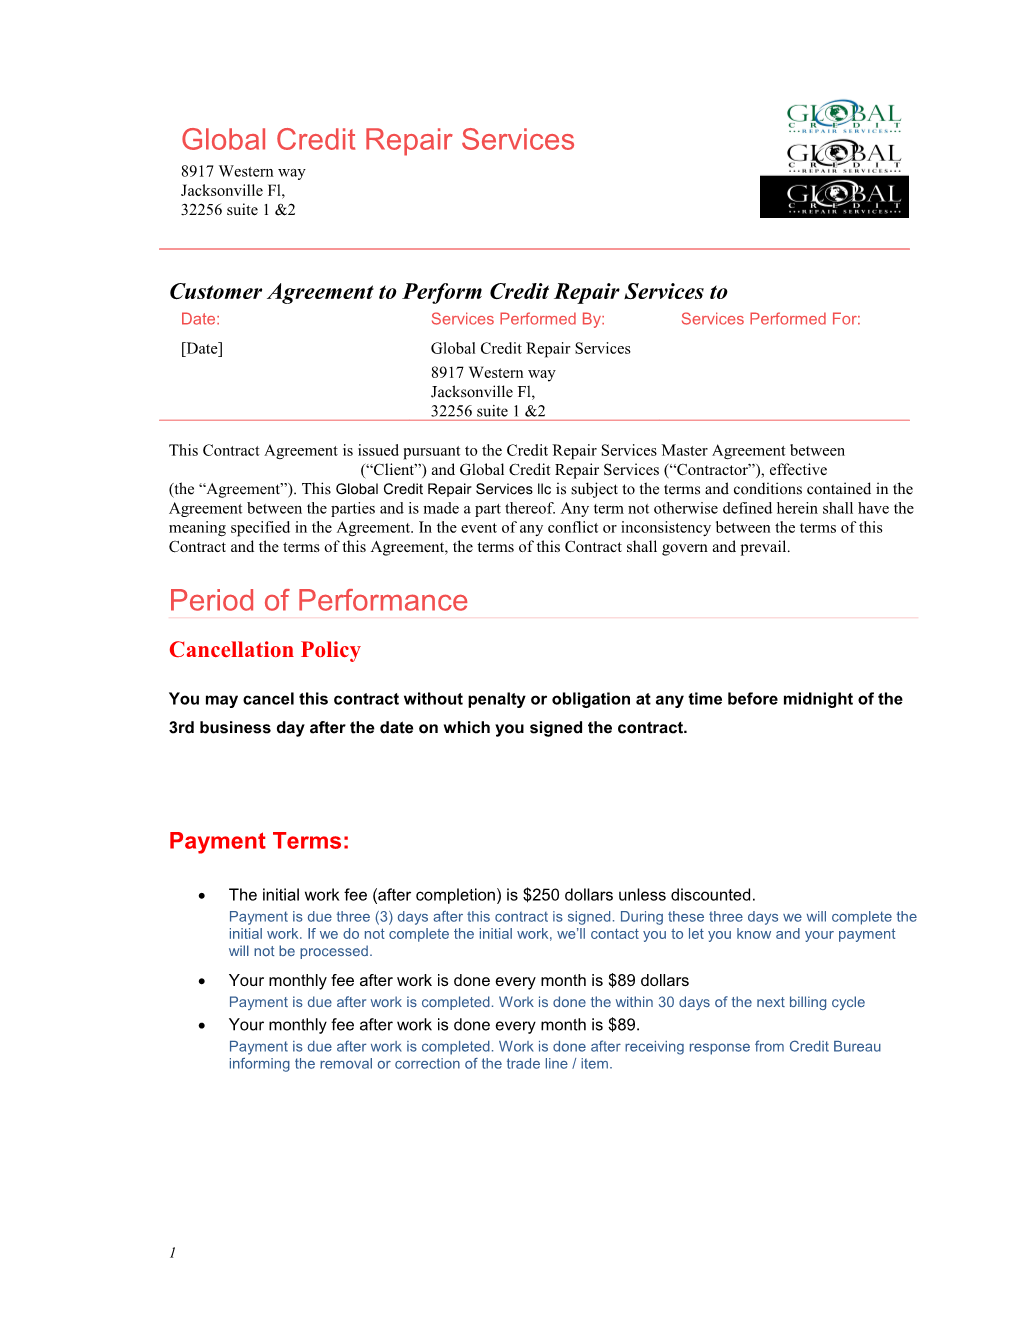 This Contract Agreement Is Issued Pursuant to the Credit Repair Services Master Agreement